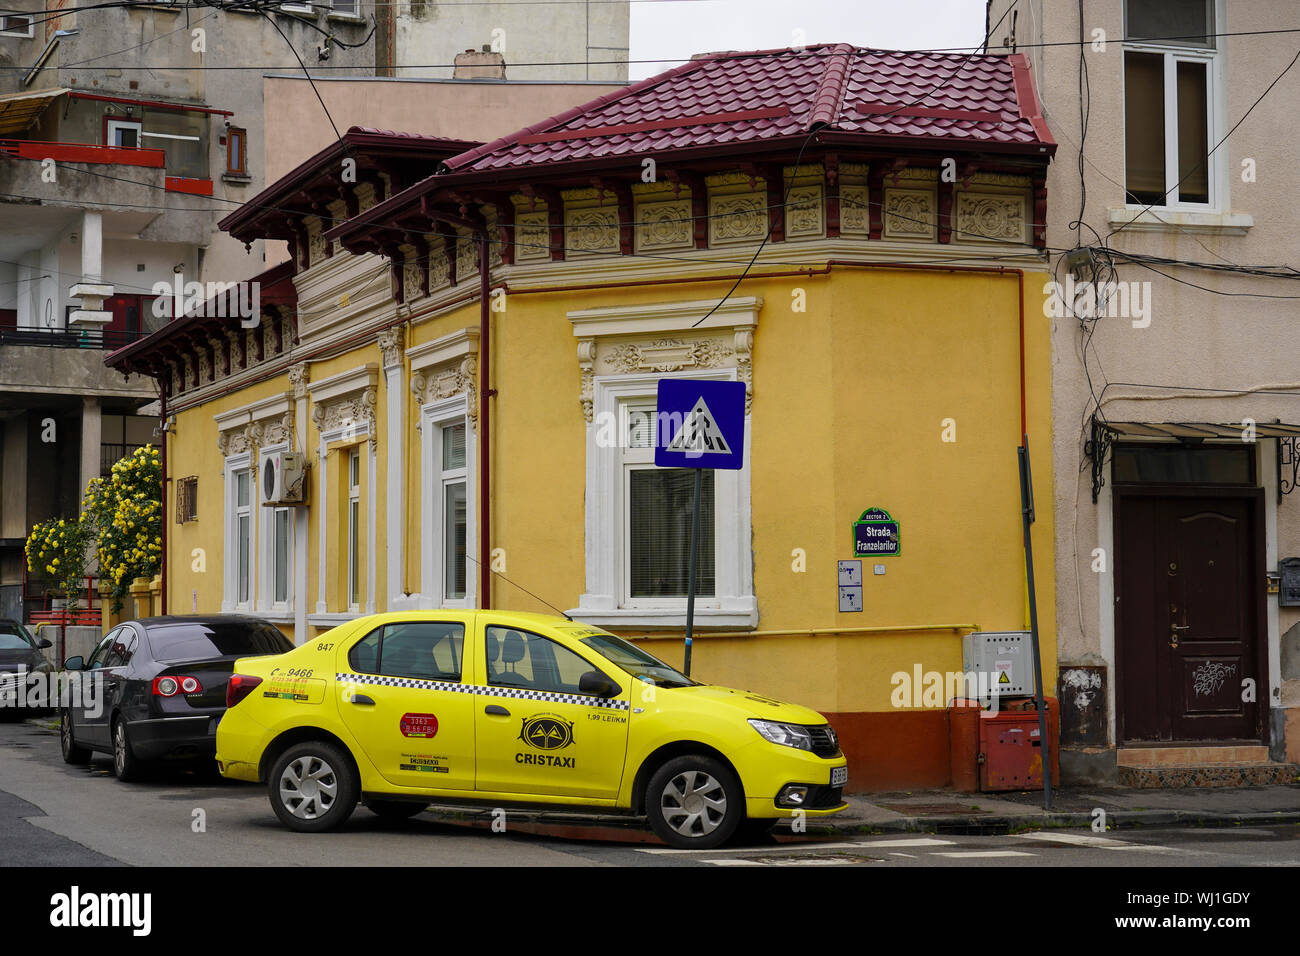 yellow taxi cab in front of a dilapidated building deterioration, Bucharest Romania Stock Photo